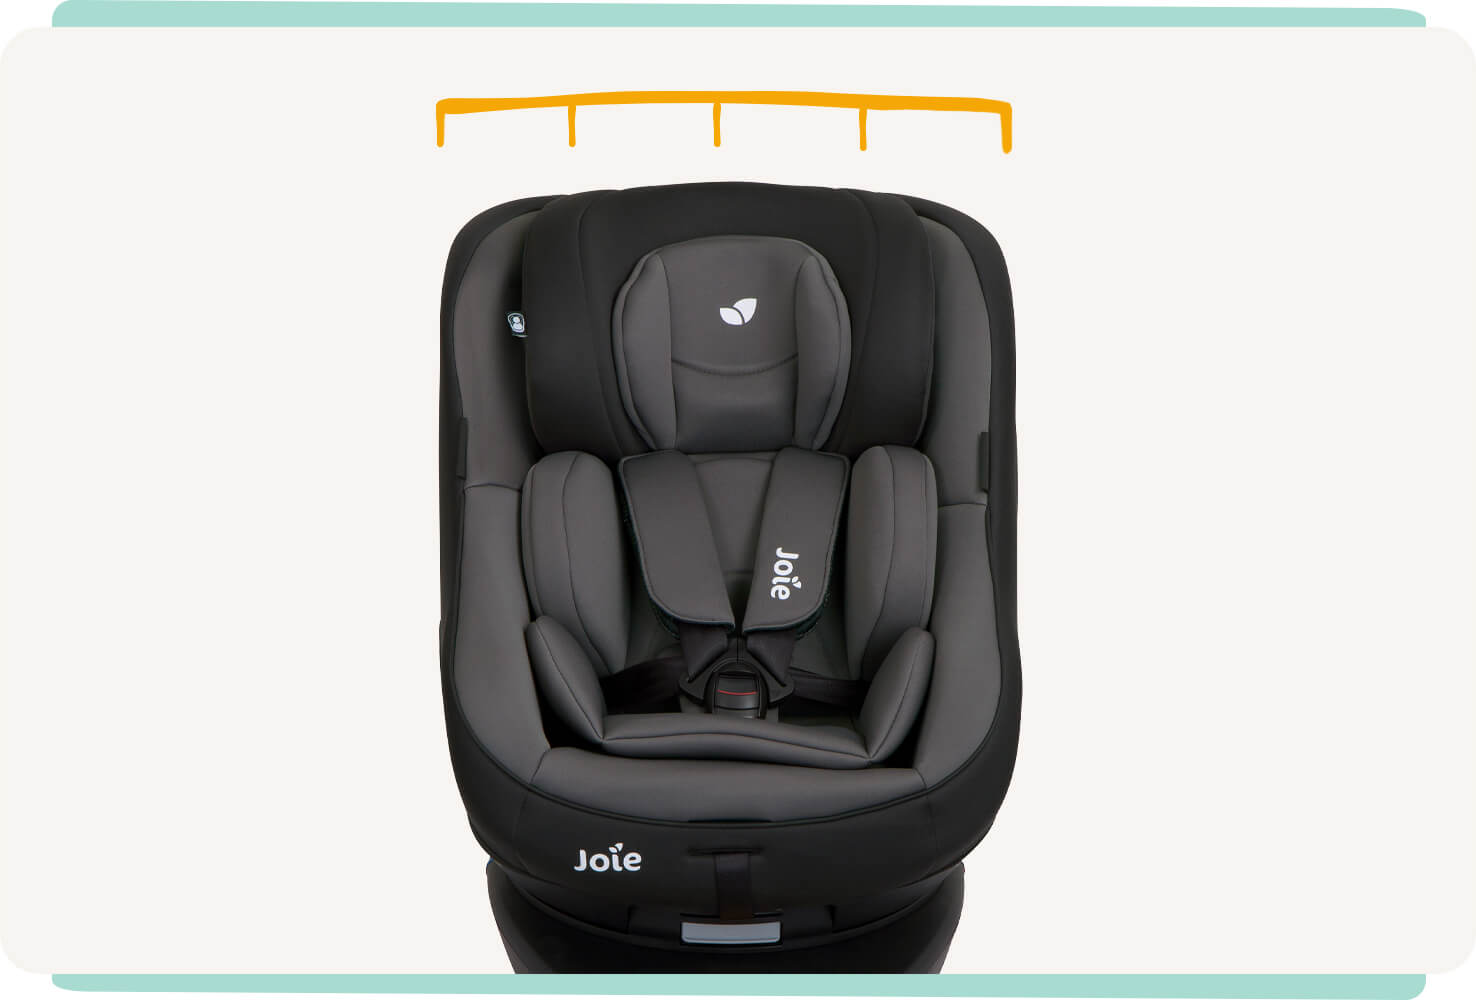  Joie spin 360 car seat ISOFIX connectors extended.